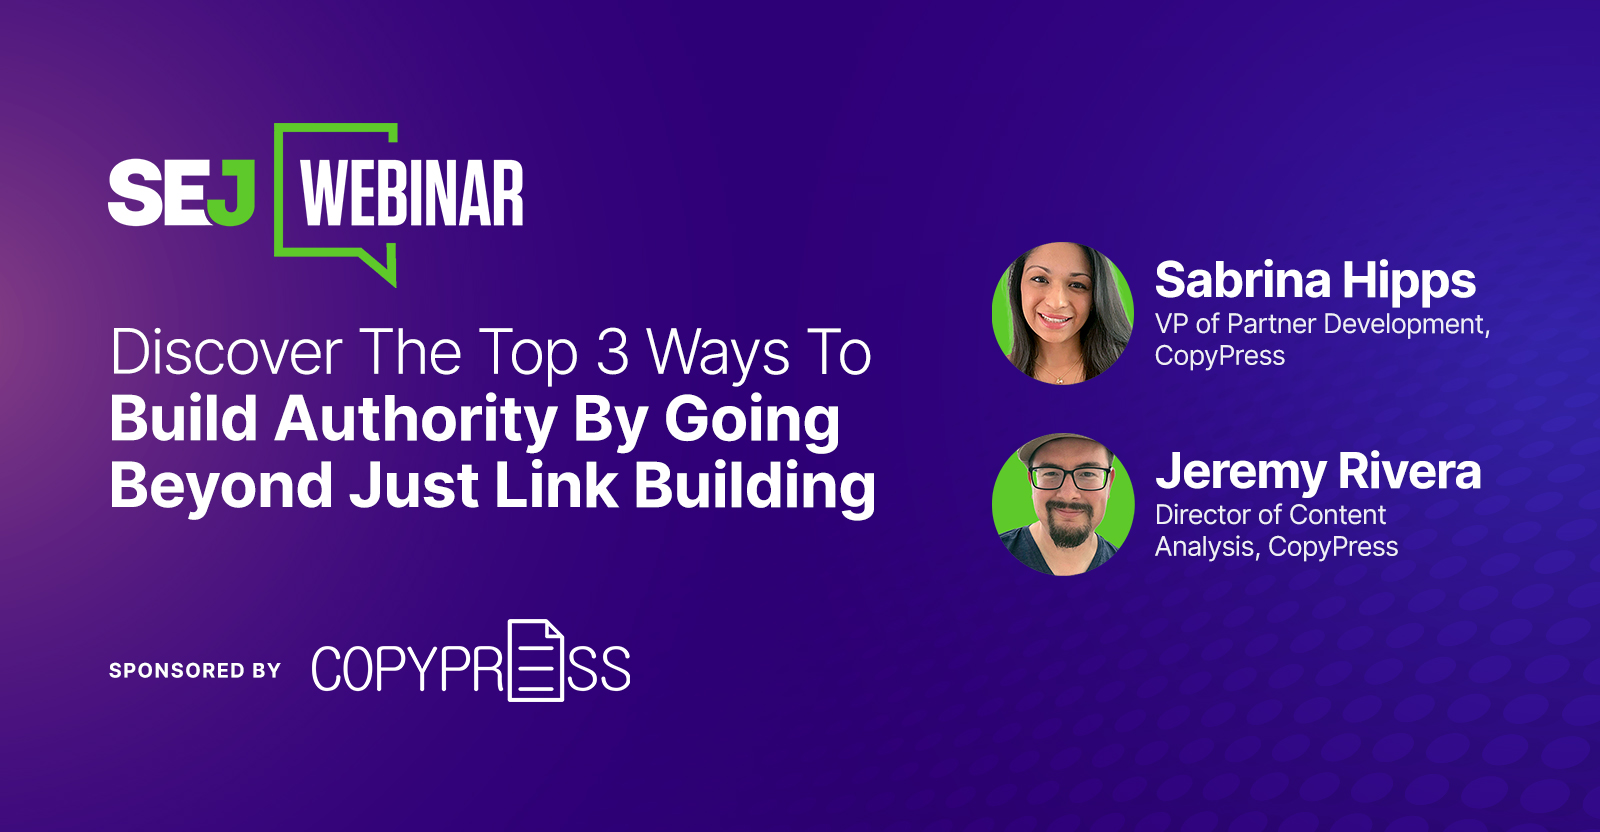 Top 3 Ways To Build Authority By Going Beyond Just Link Building